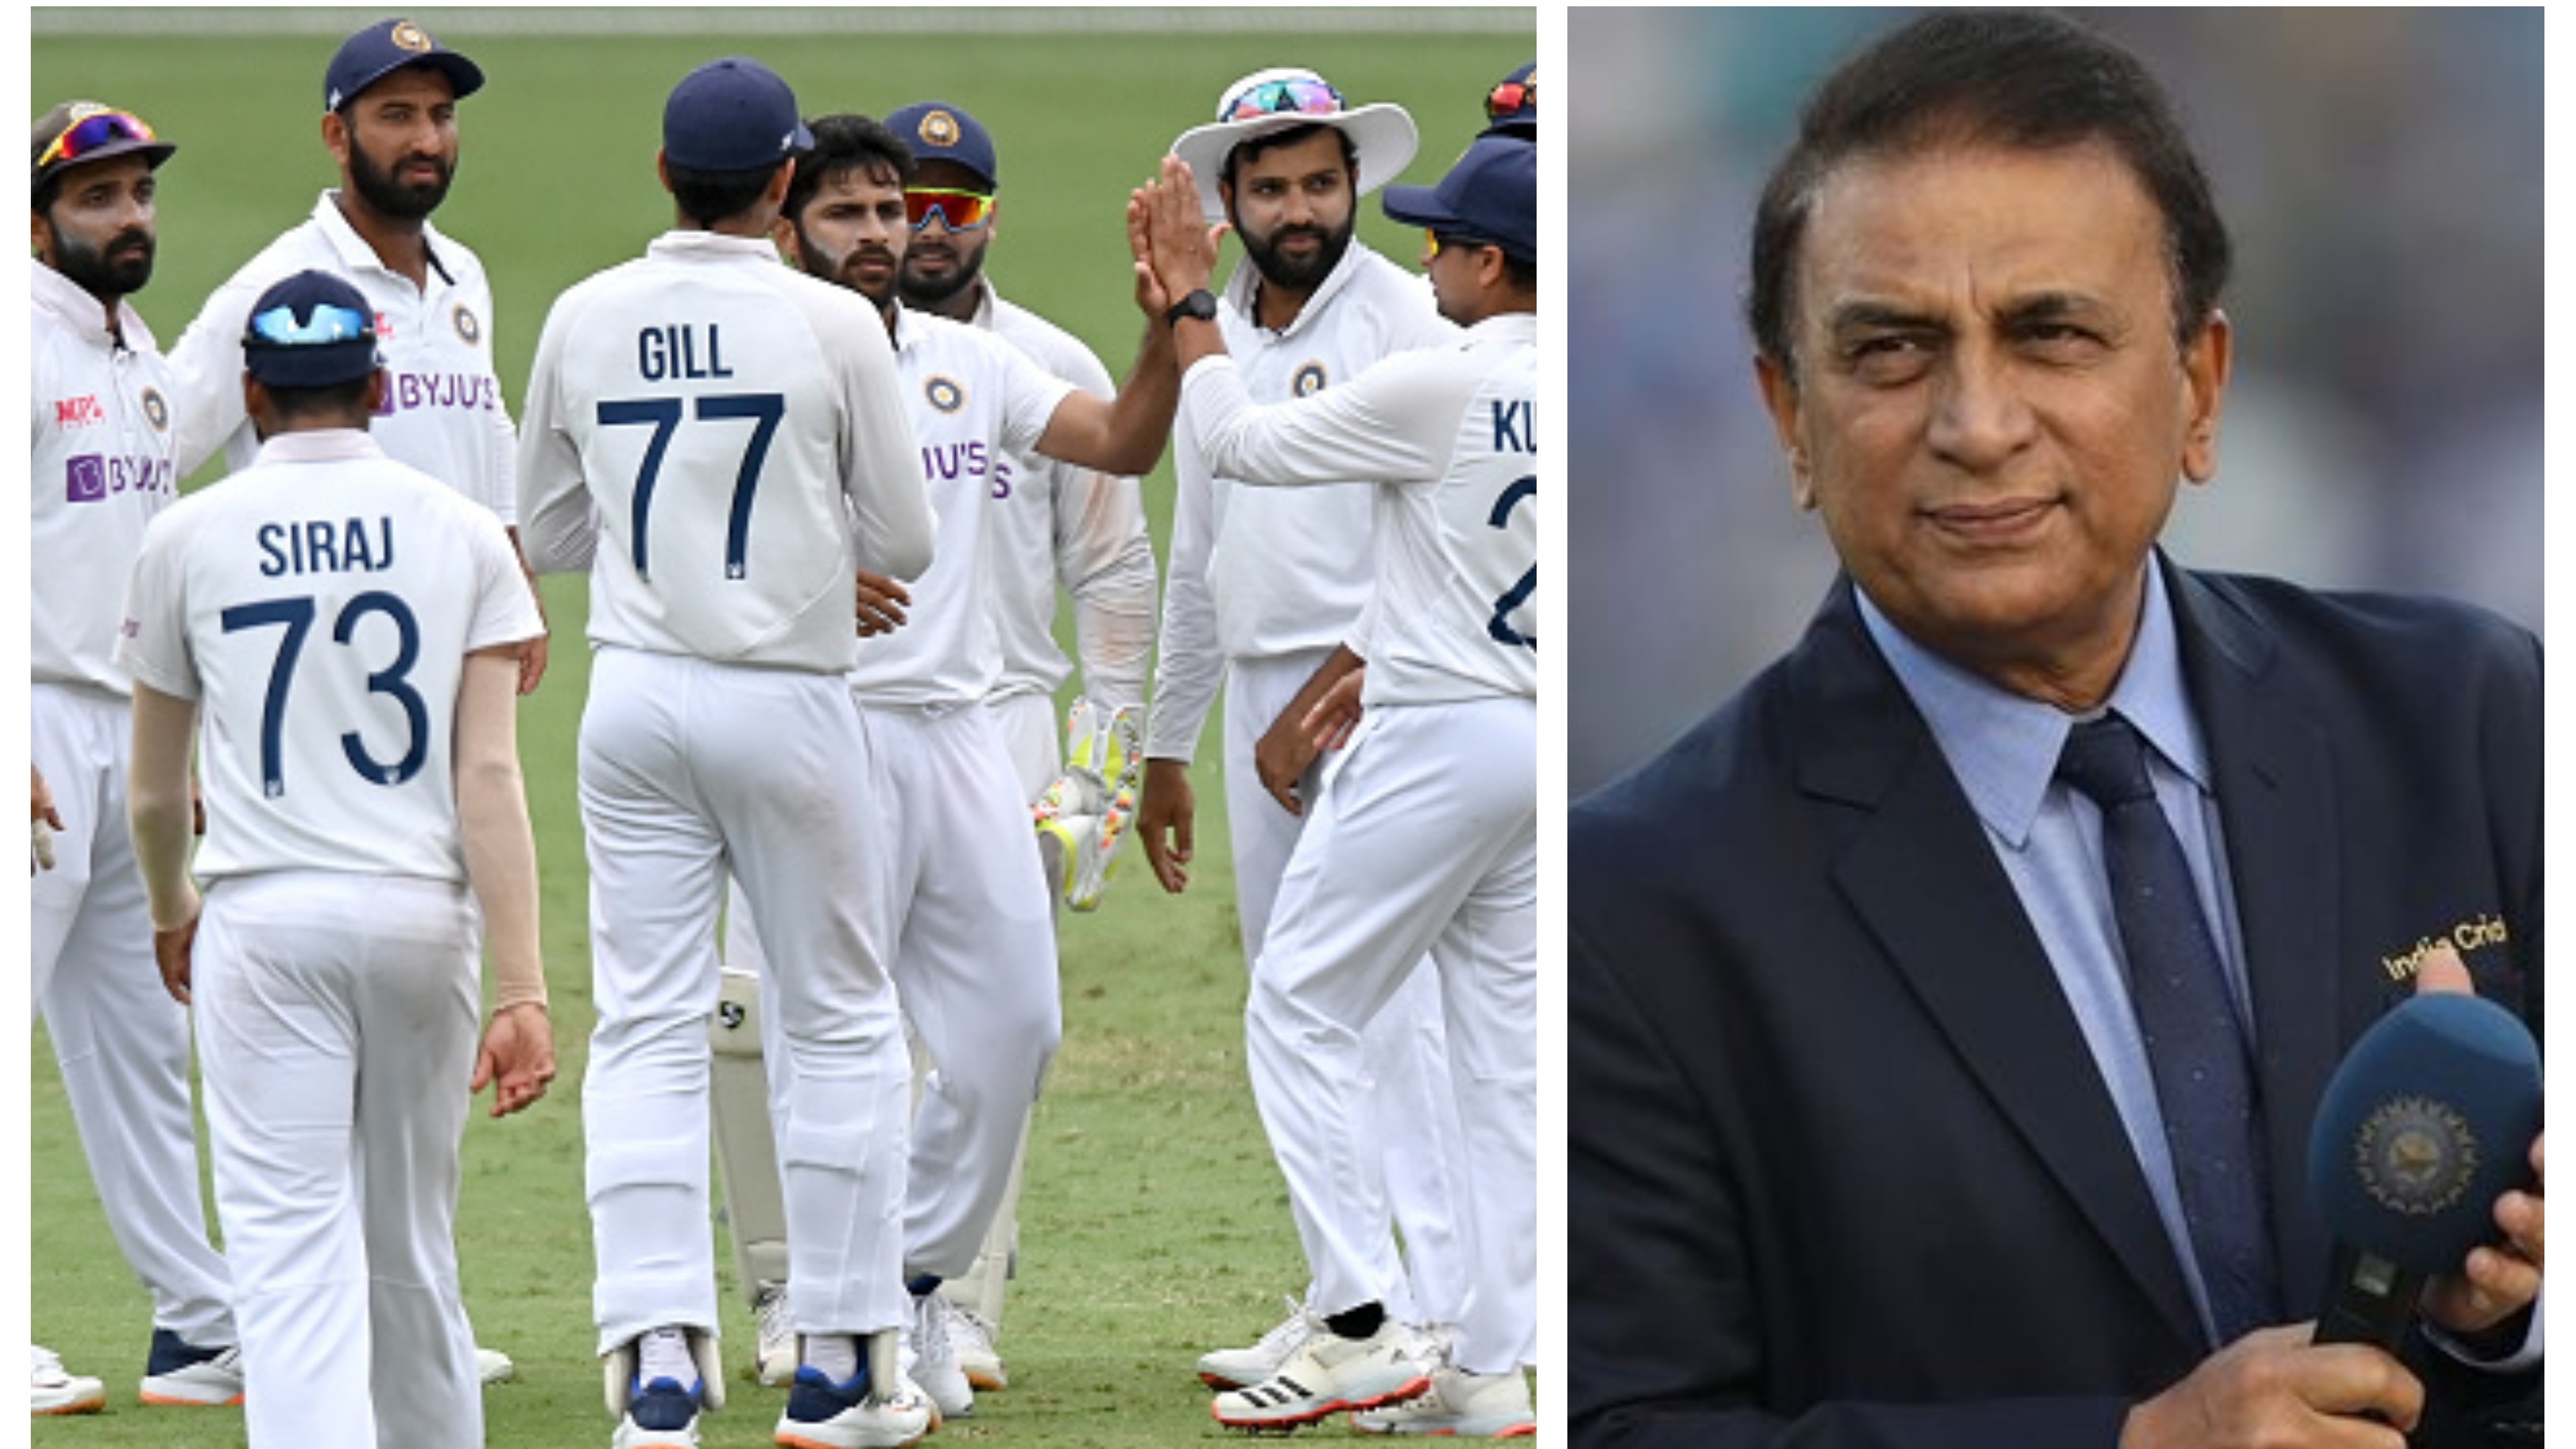 AUS v IND 2020-21: ‘Truly proud of our cricketers’, Gavaskar pays rich tribute to Team India’s fighting spirit